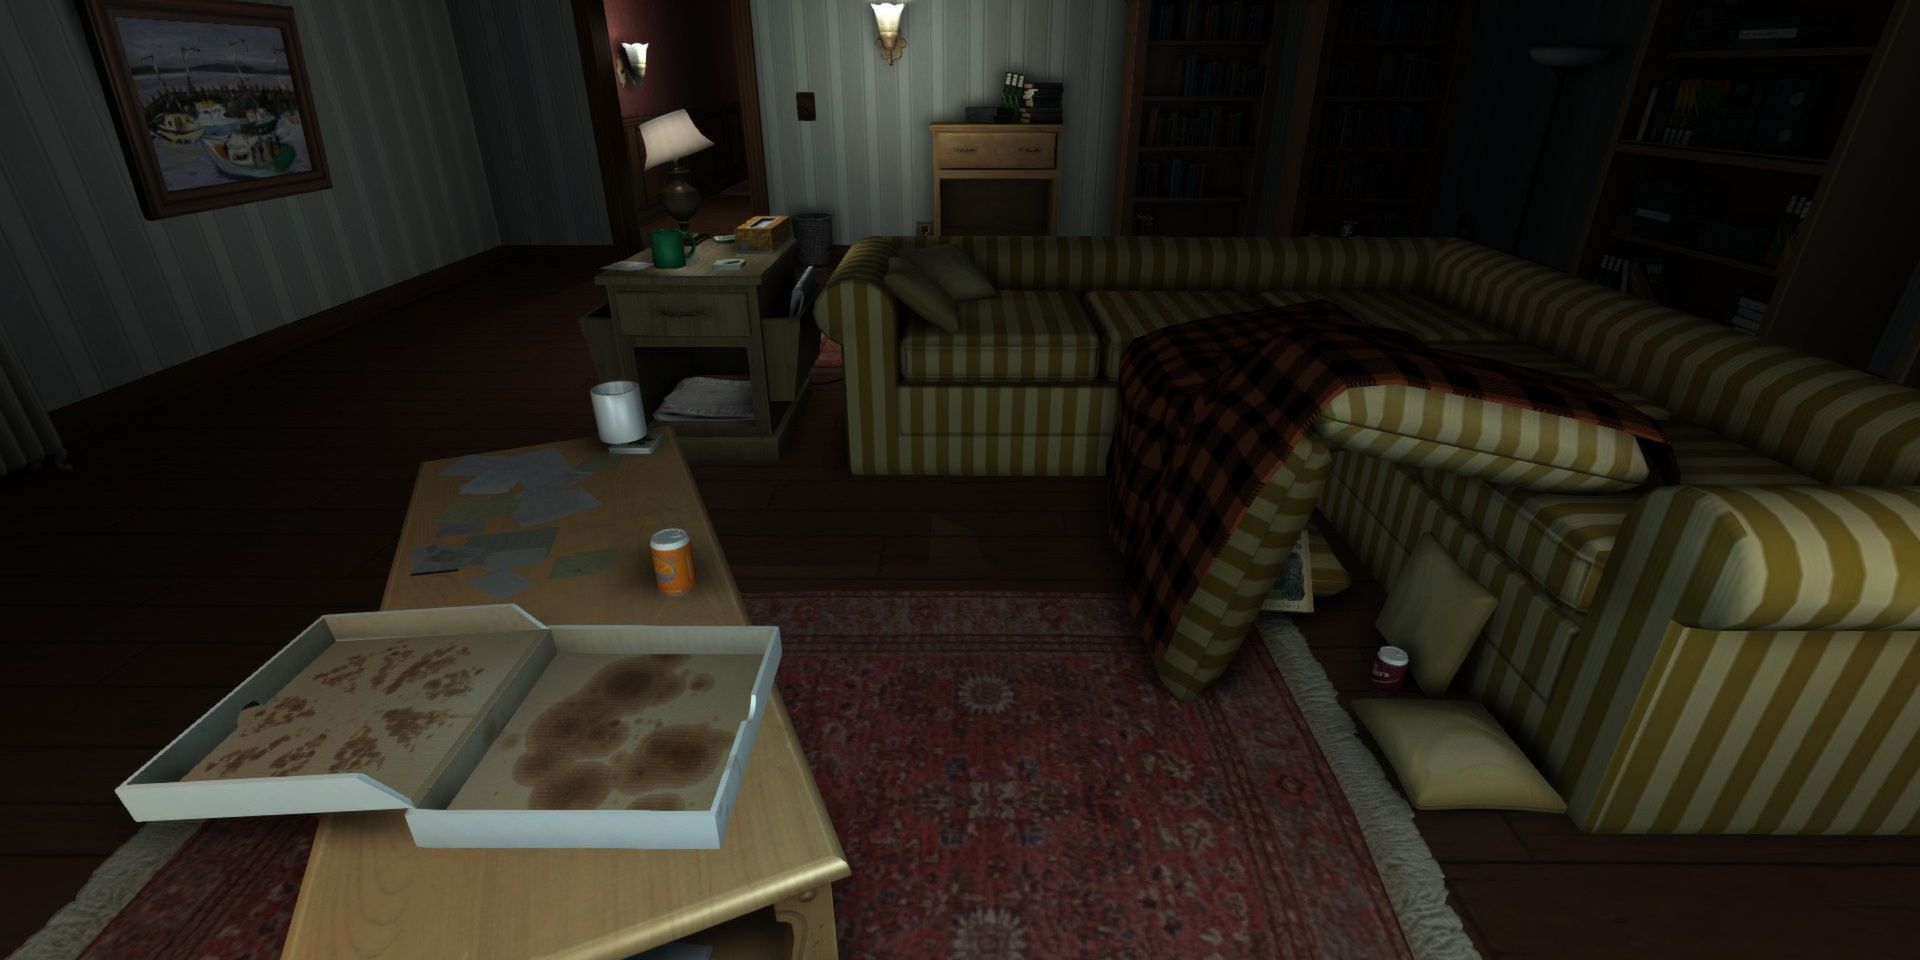 The living room in Gone Home